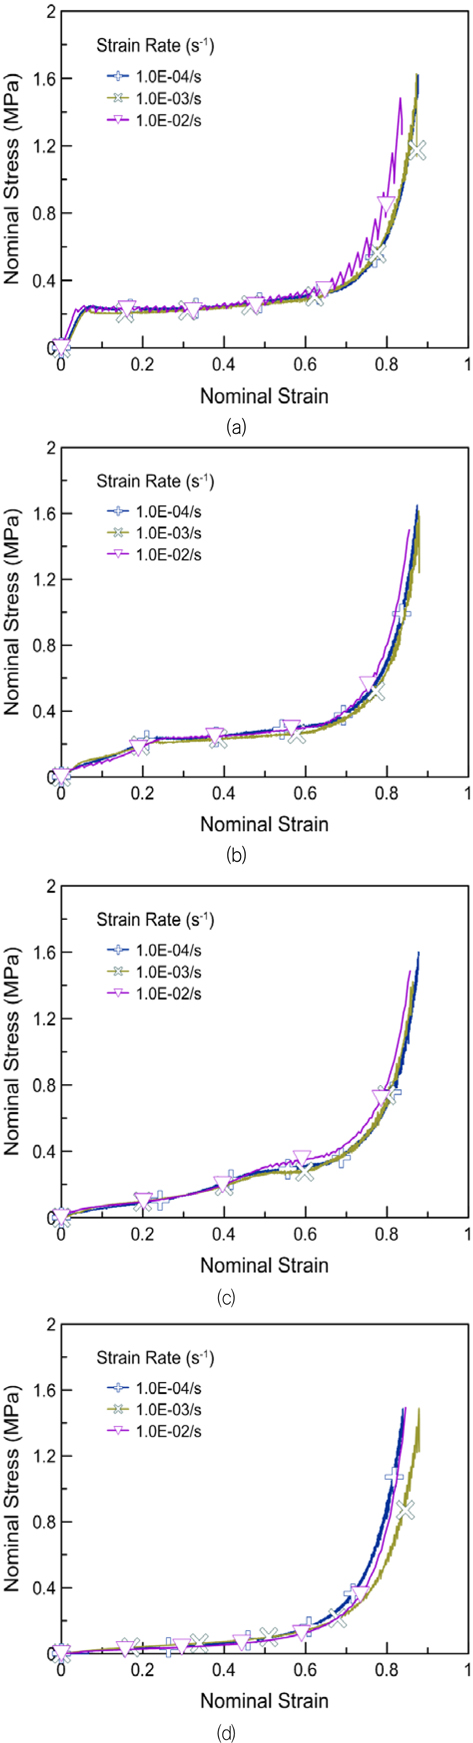 Stress-strain relationship curves after deformation recovery of PIF according to the eng. strain rate for (a) 0.02, (b) 0.25, (c) 0.50 and (d) 0.85 initially applied strain level